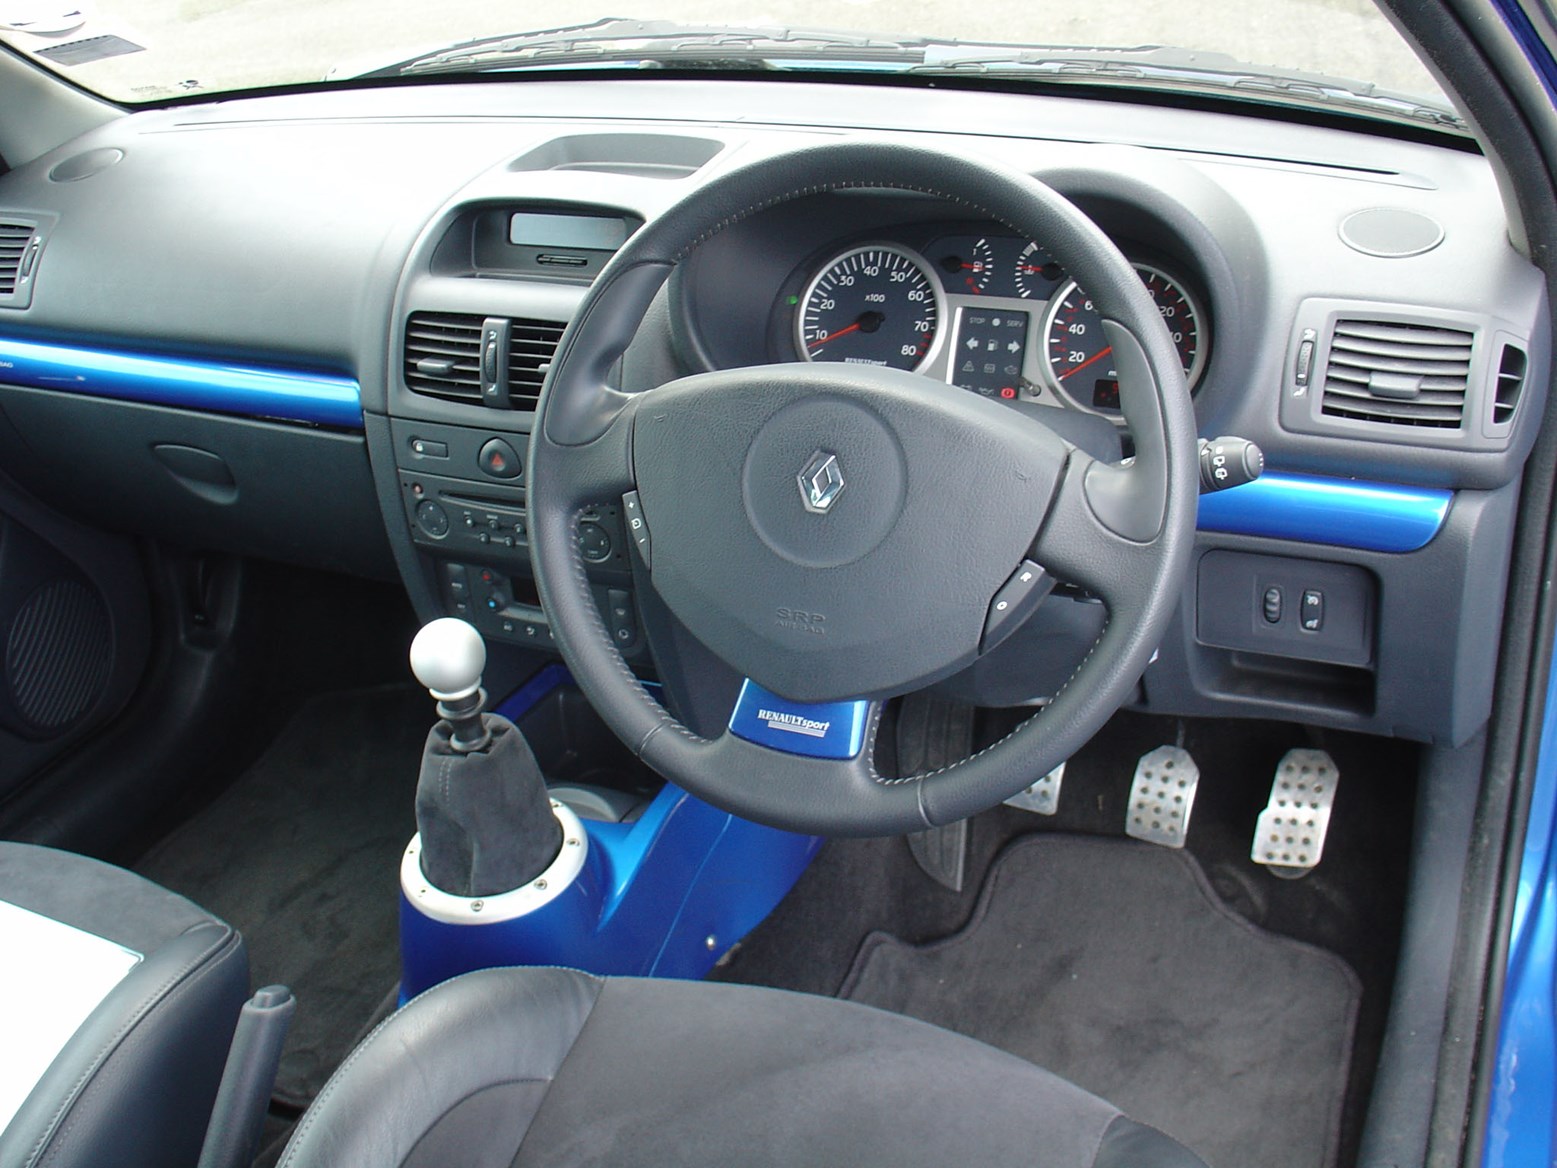 Used Renault Clio V6 2001 2005 Interior Parkers